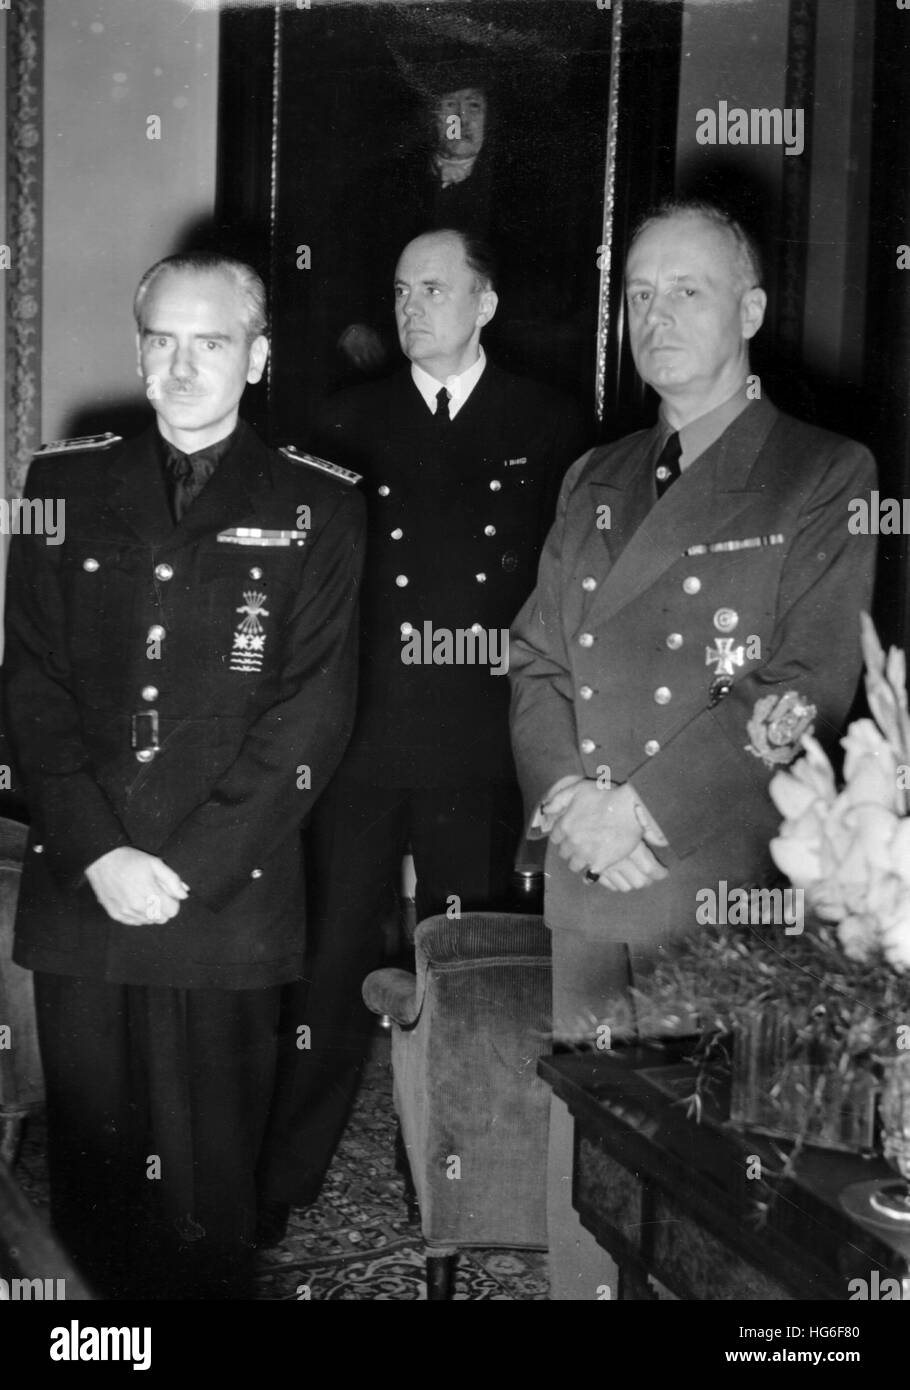 The Nazi propaganda picture shows Spanish Interior Minister Ramón Serrano Súner (l.), the Foreign Minister of Nazi Germany Joachim von Ribbentrop (r.), and interpreter Paul-Otto Schmidt (m) at a reception in the Federal Foreign Office in Berlin, Germany, 18 September 1940. Fotoarchiv für Zeitgeschichtee - NO WIRE SERVICE - | usage worldwide Stock Photo